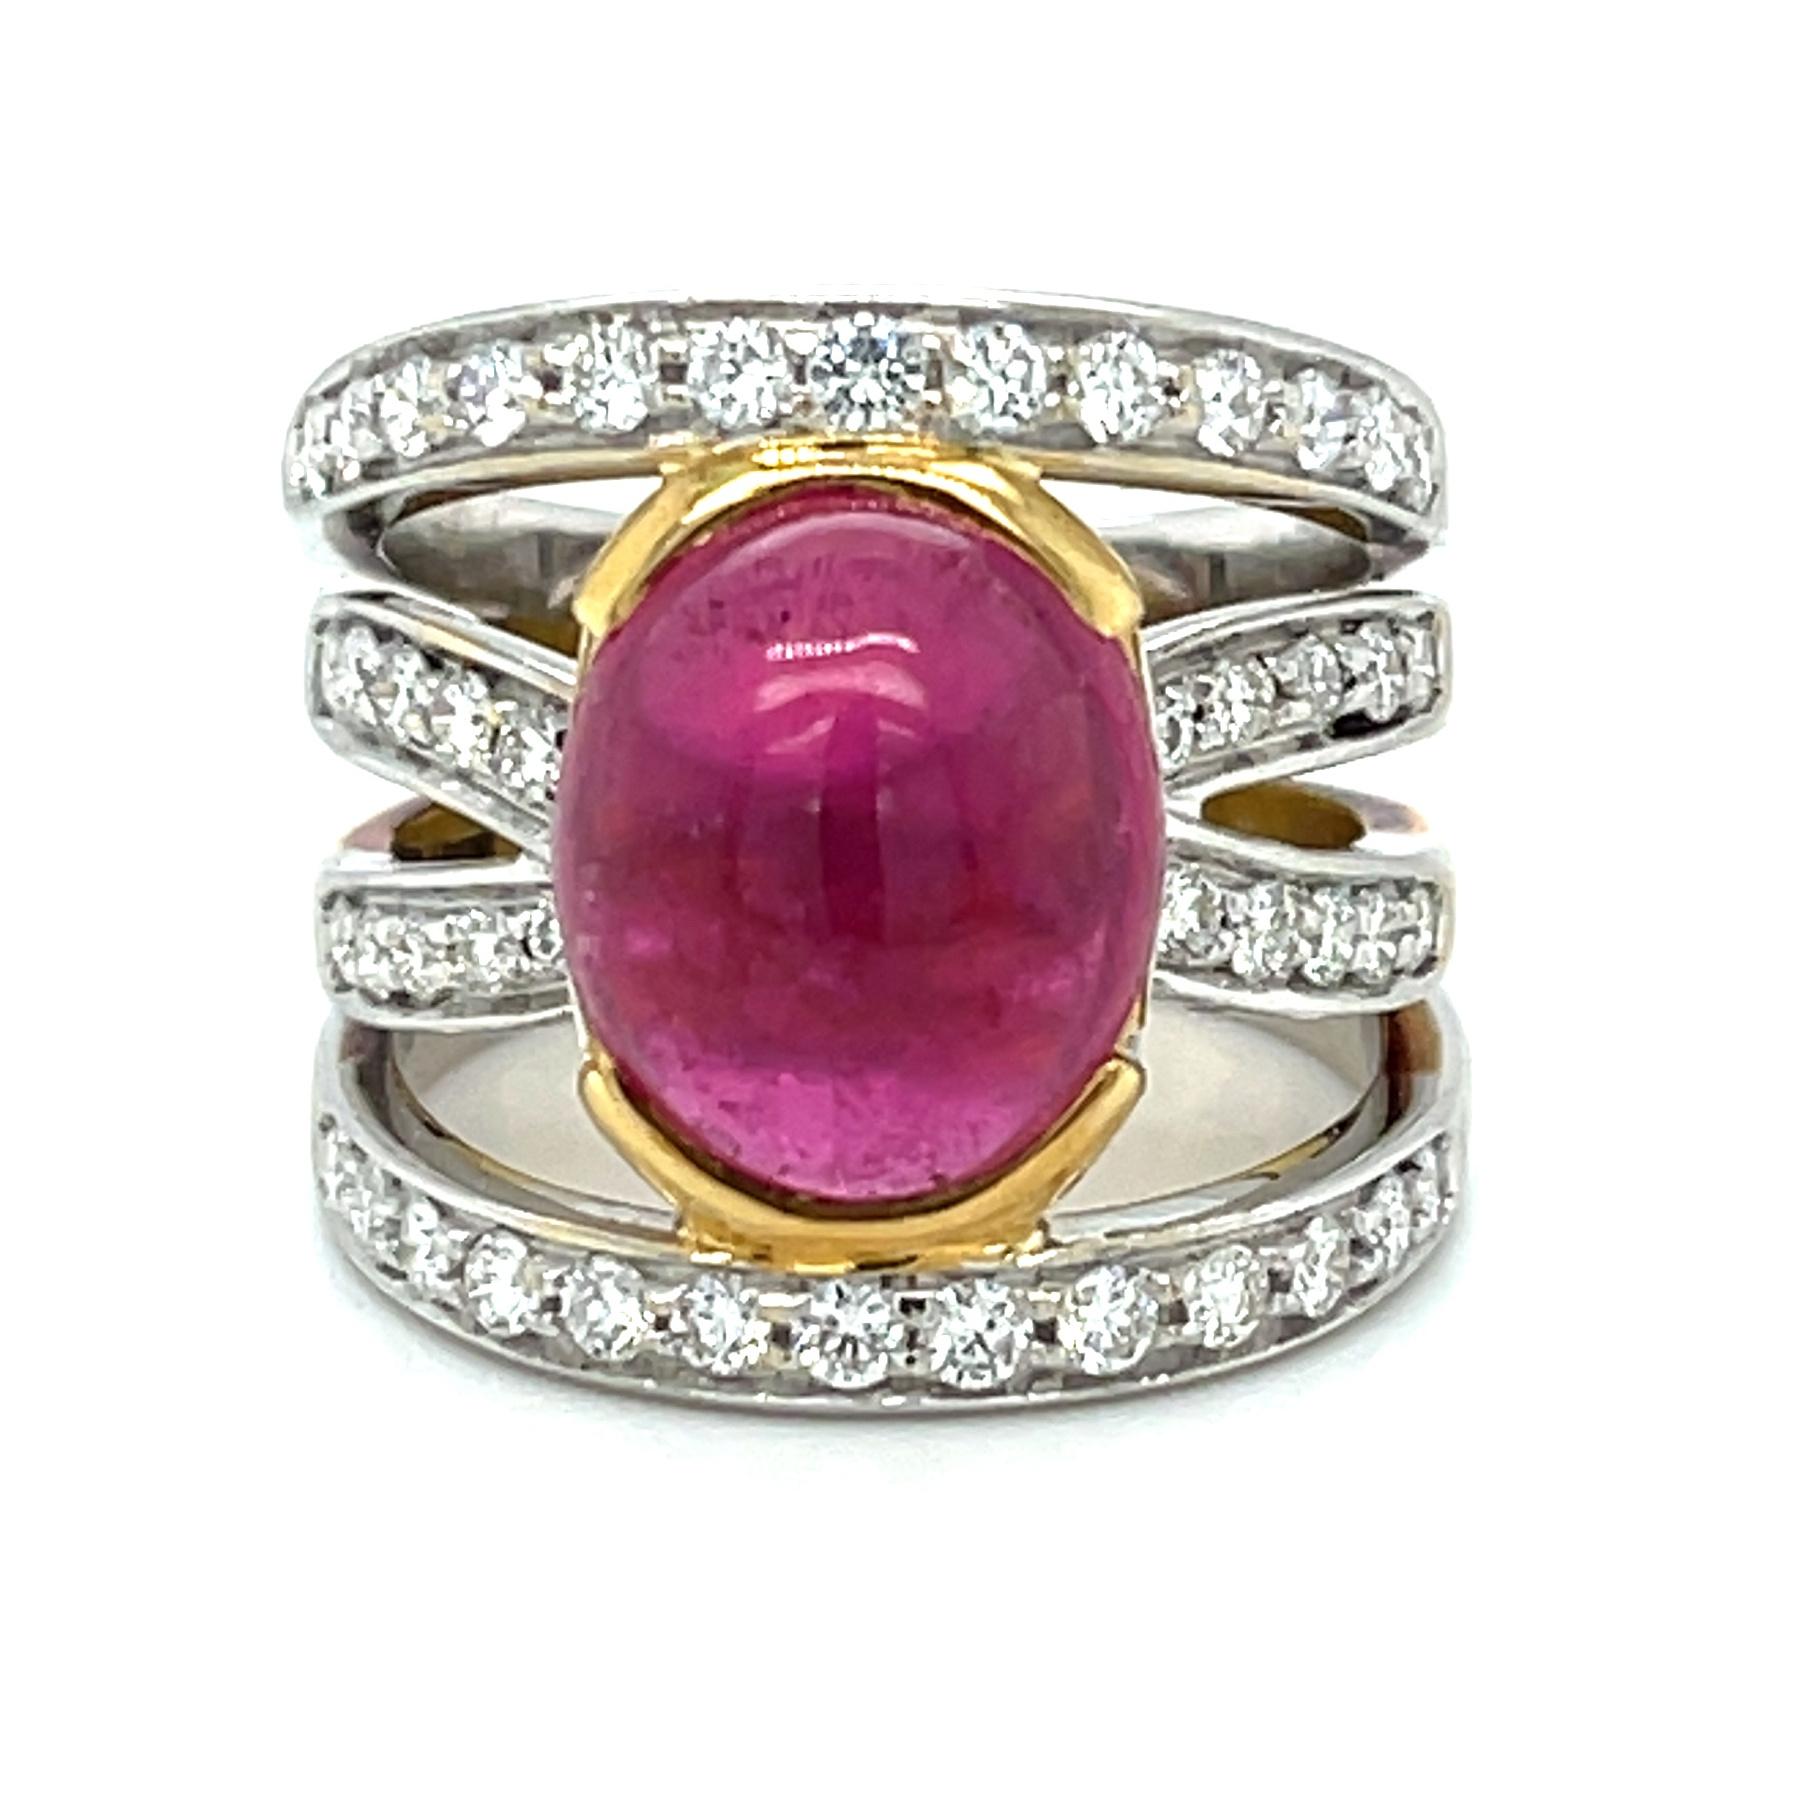 Artisan 8.44 Carat Pink Tourmaline Cabochon and Diamond Band Ring in 18k Gold For Sale